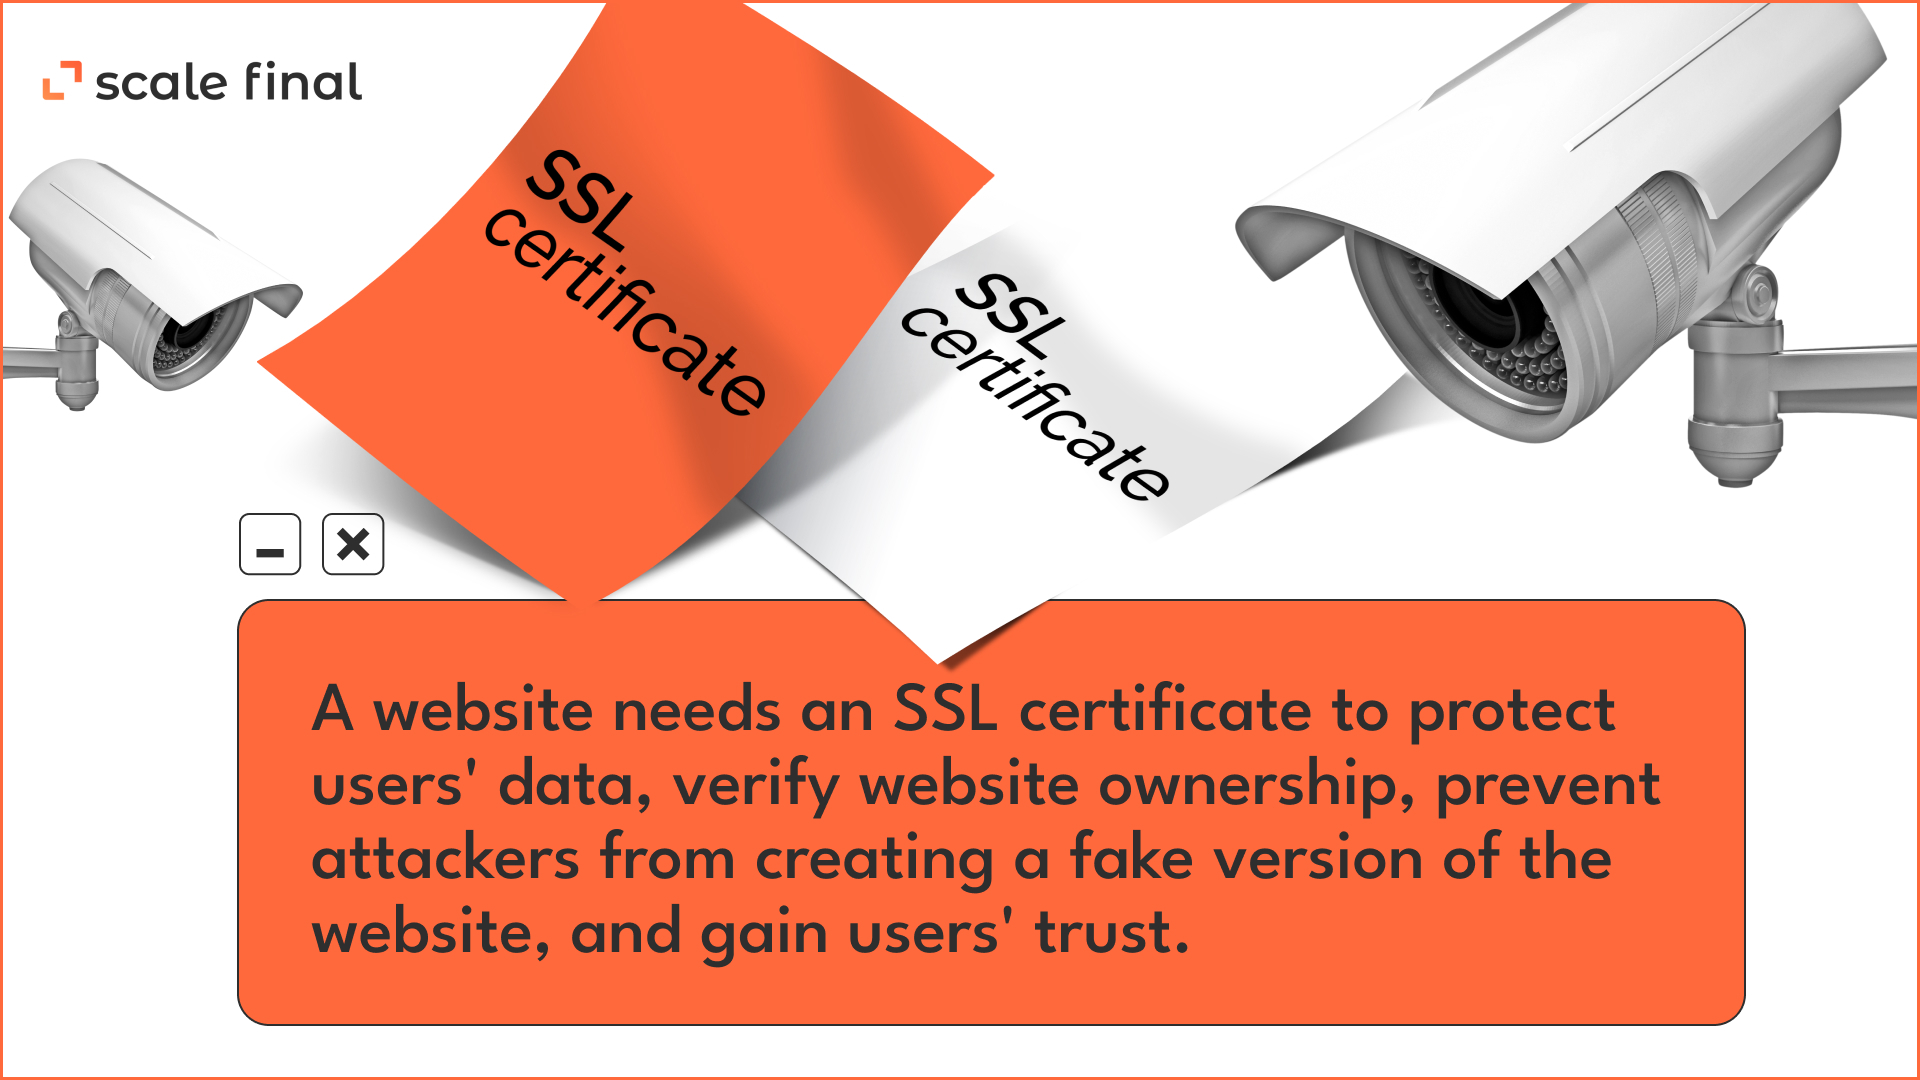 A website needs an SSL certificate to protect users' data, verify website ownership, prevent attackers from creating a fake version of the website, and gain users' trust.